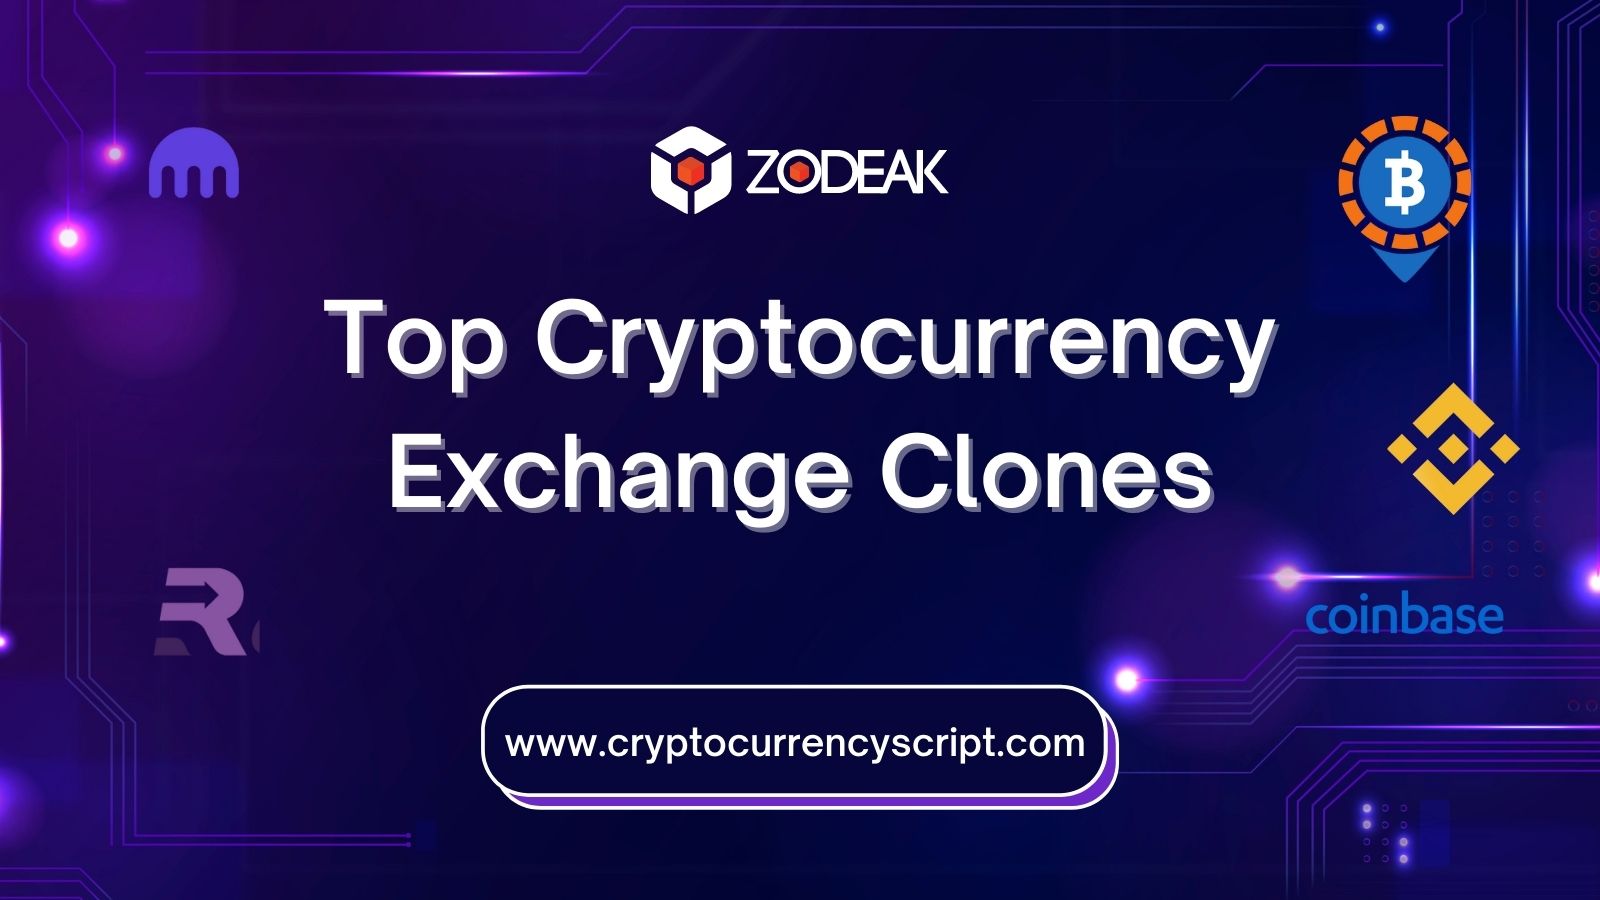 Top Cryptocurrency Exchange Clones in 2022 that you must know!